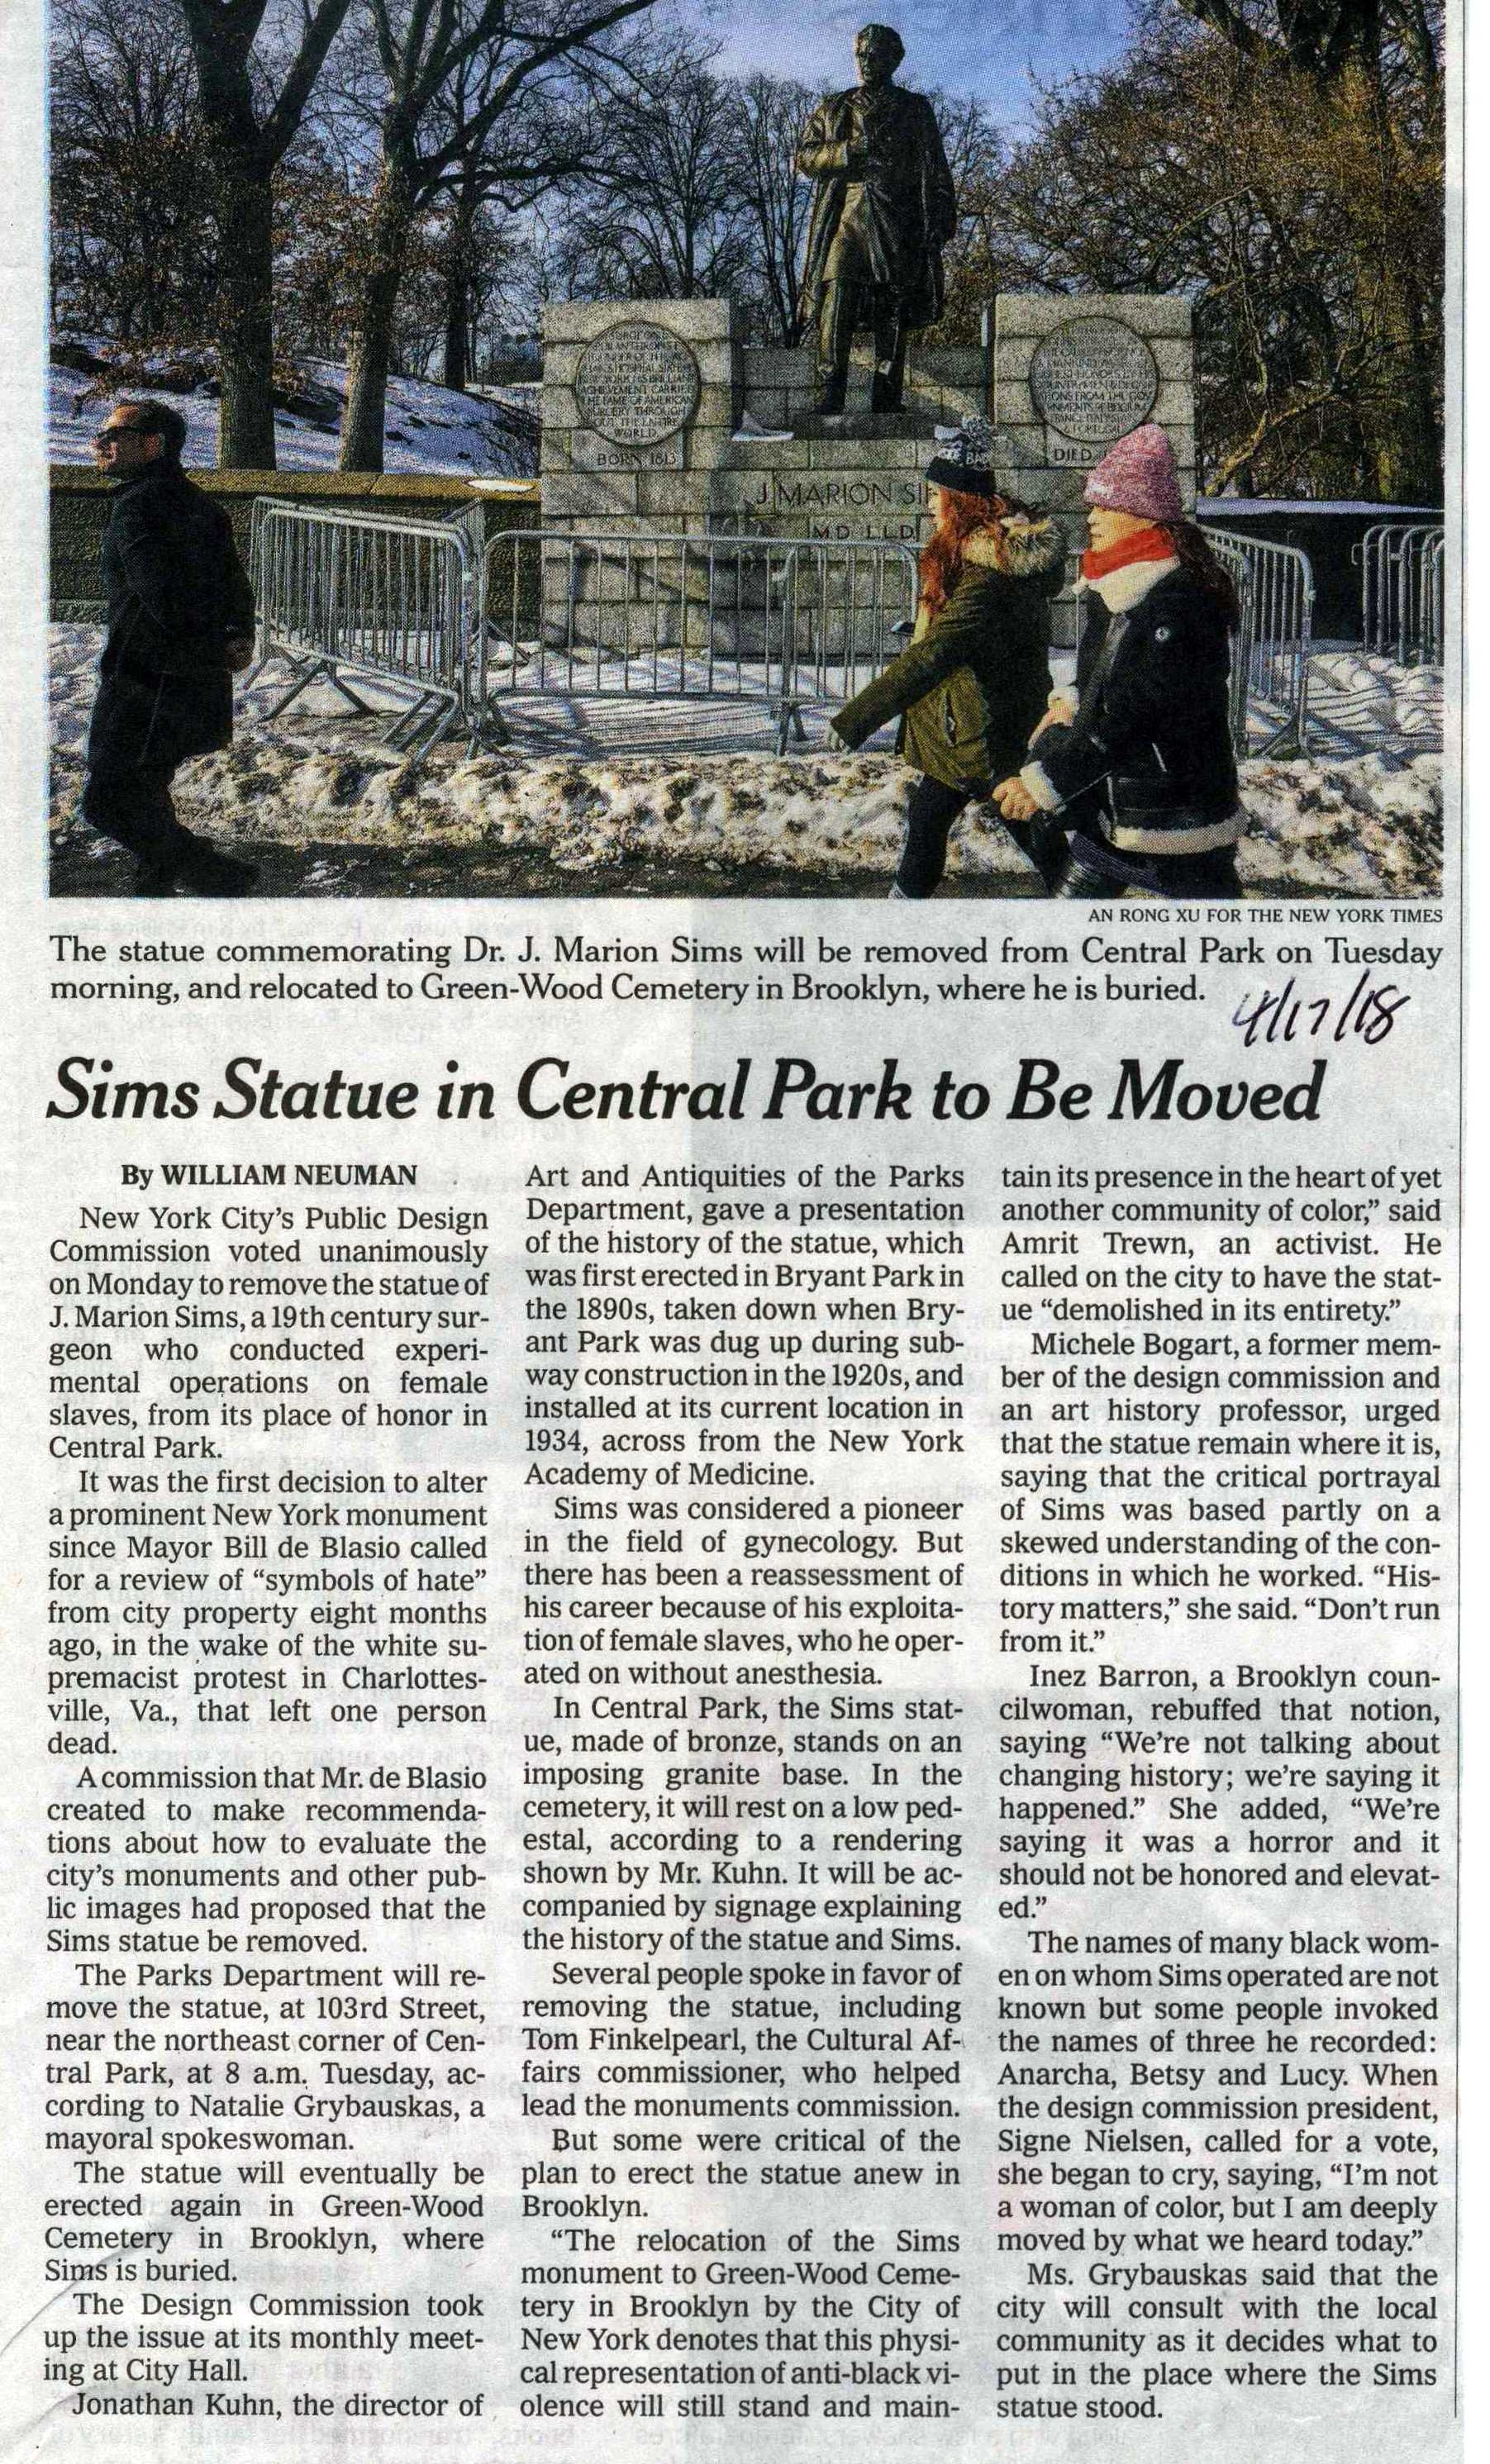 A New York Times article about the removal of the statue. 